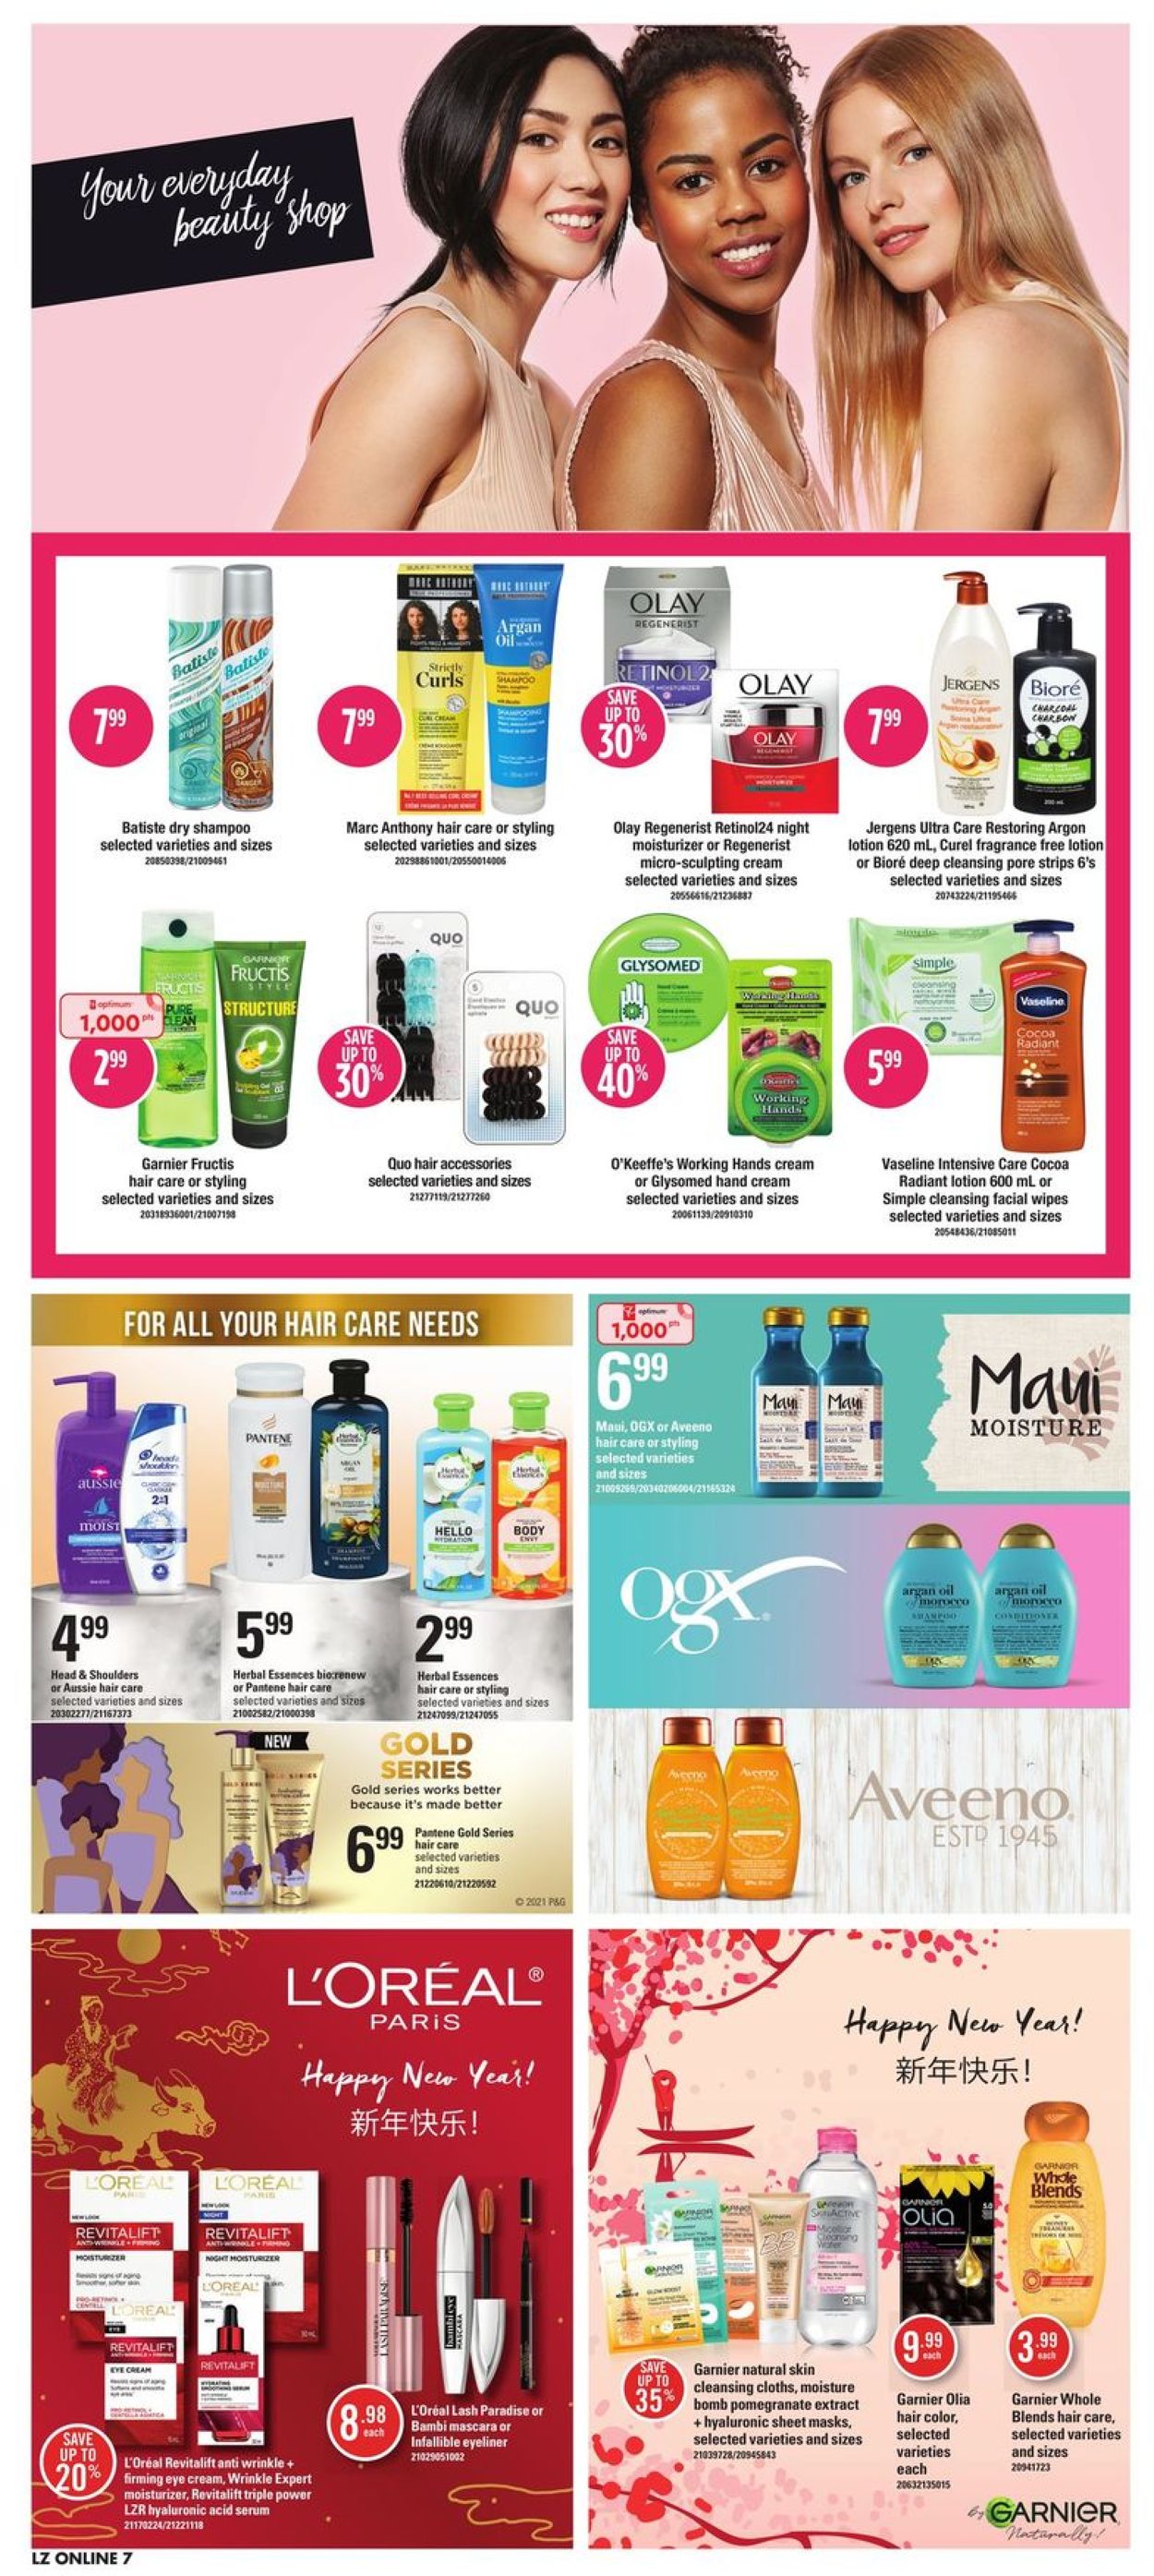 Loblaws Flyer from 01/21/2021